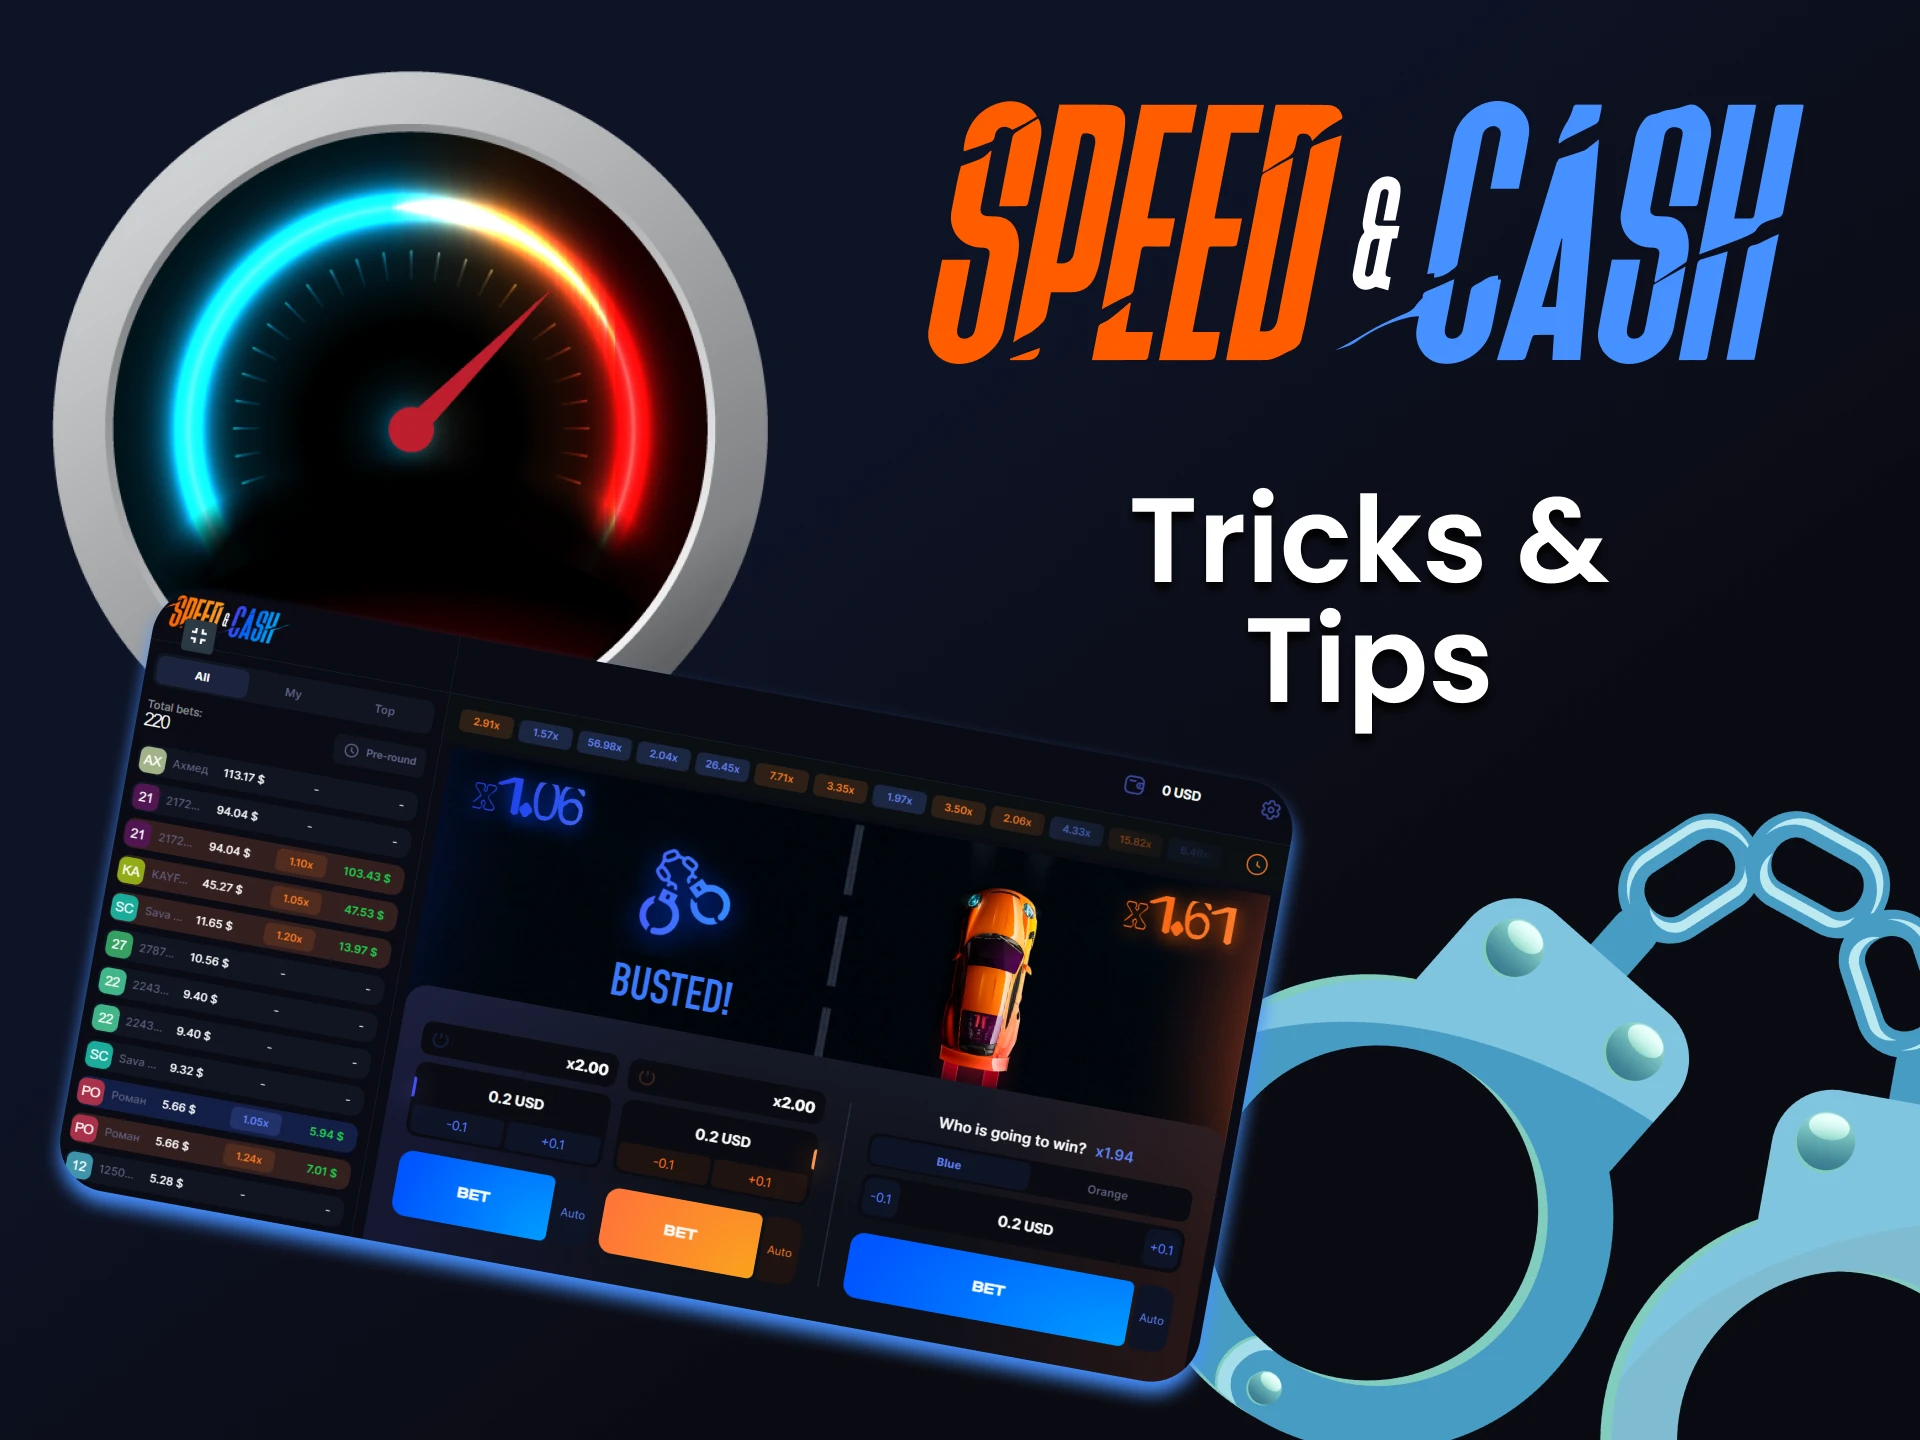 You can read reviews about the game Speed&Cash.